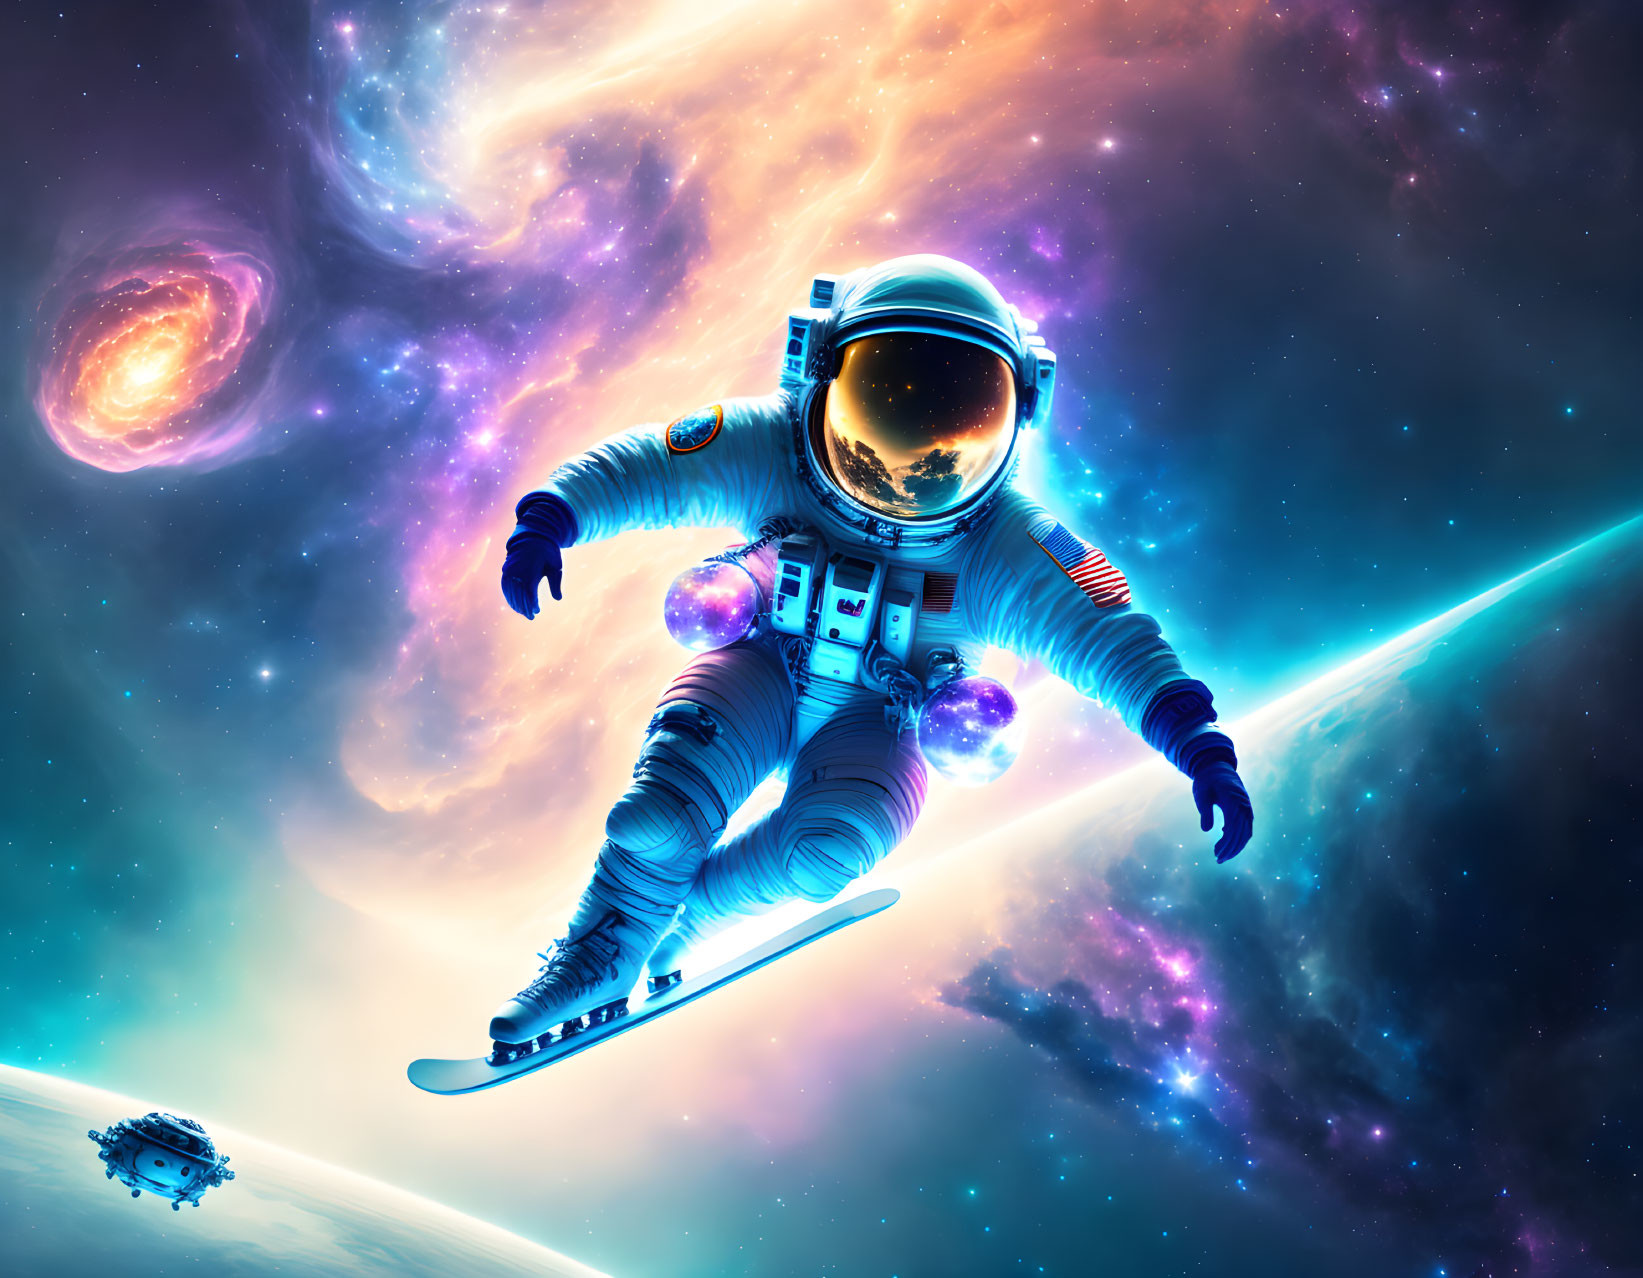 Astronaut snowboarding in space with cosmic clouds and comet backdrop